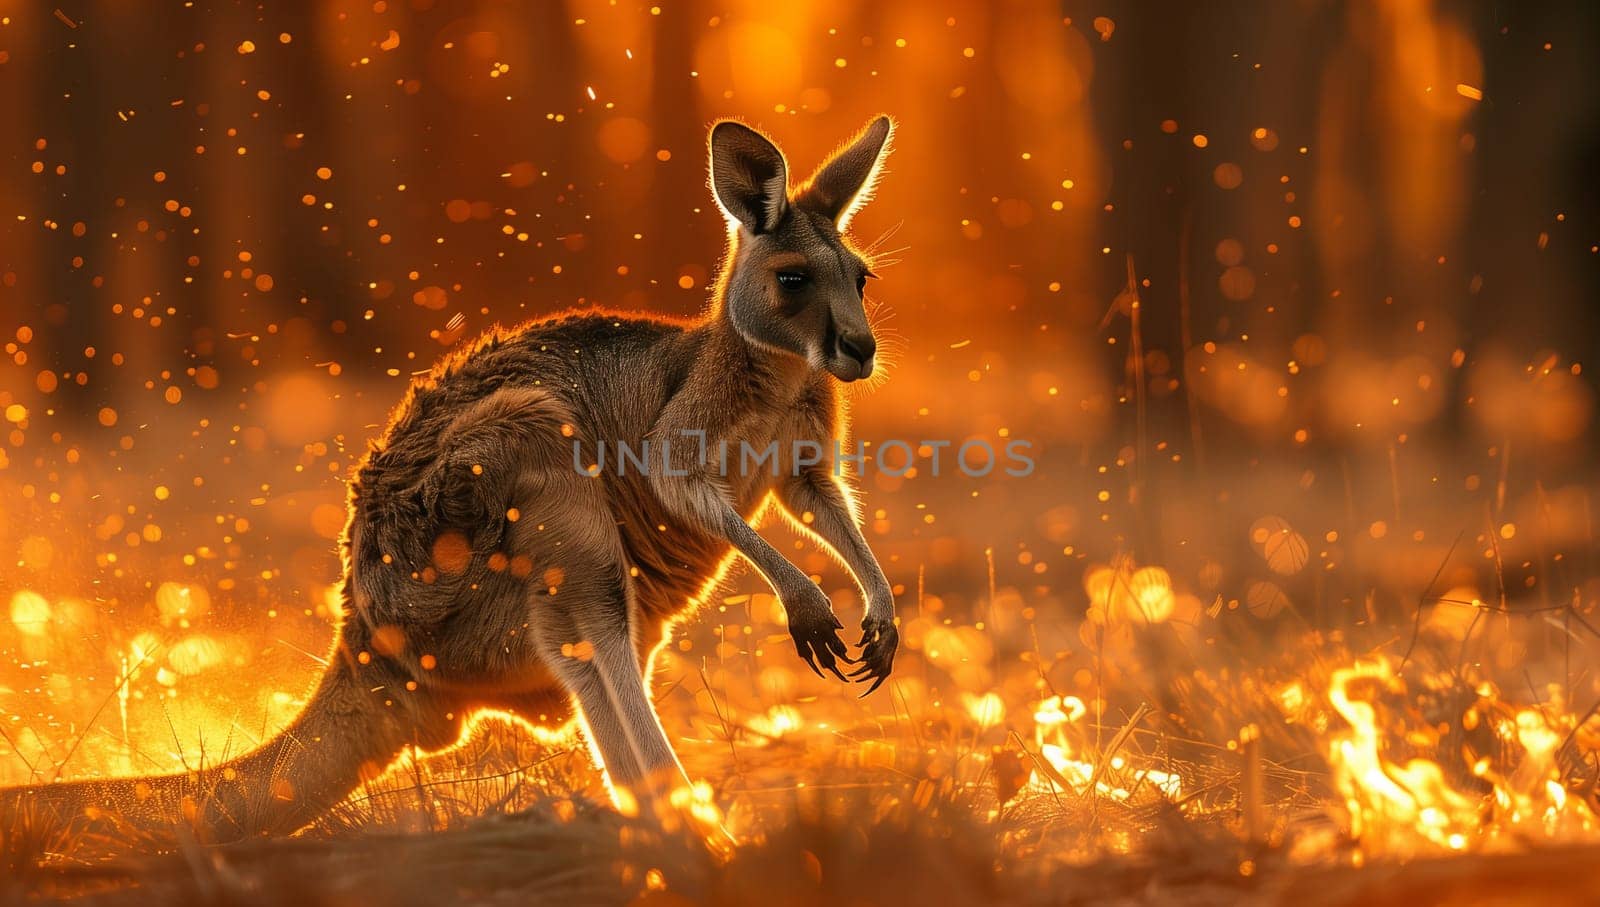 A Marsupial from the Macropodidae family, the Kangaroo is seen running through a field of fire, showcasing a rare event in wildlife